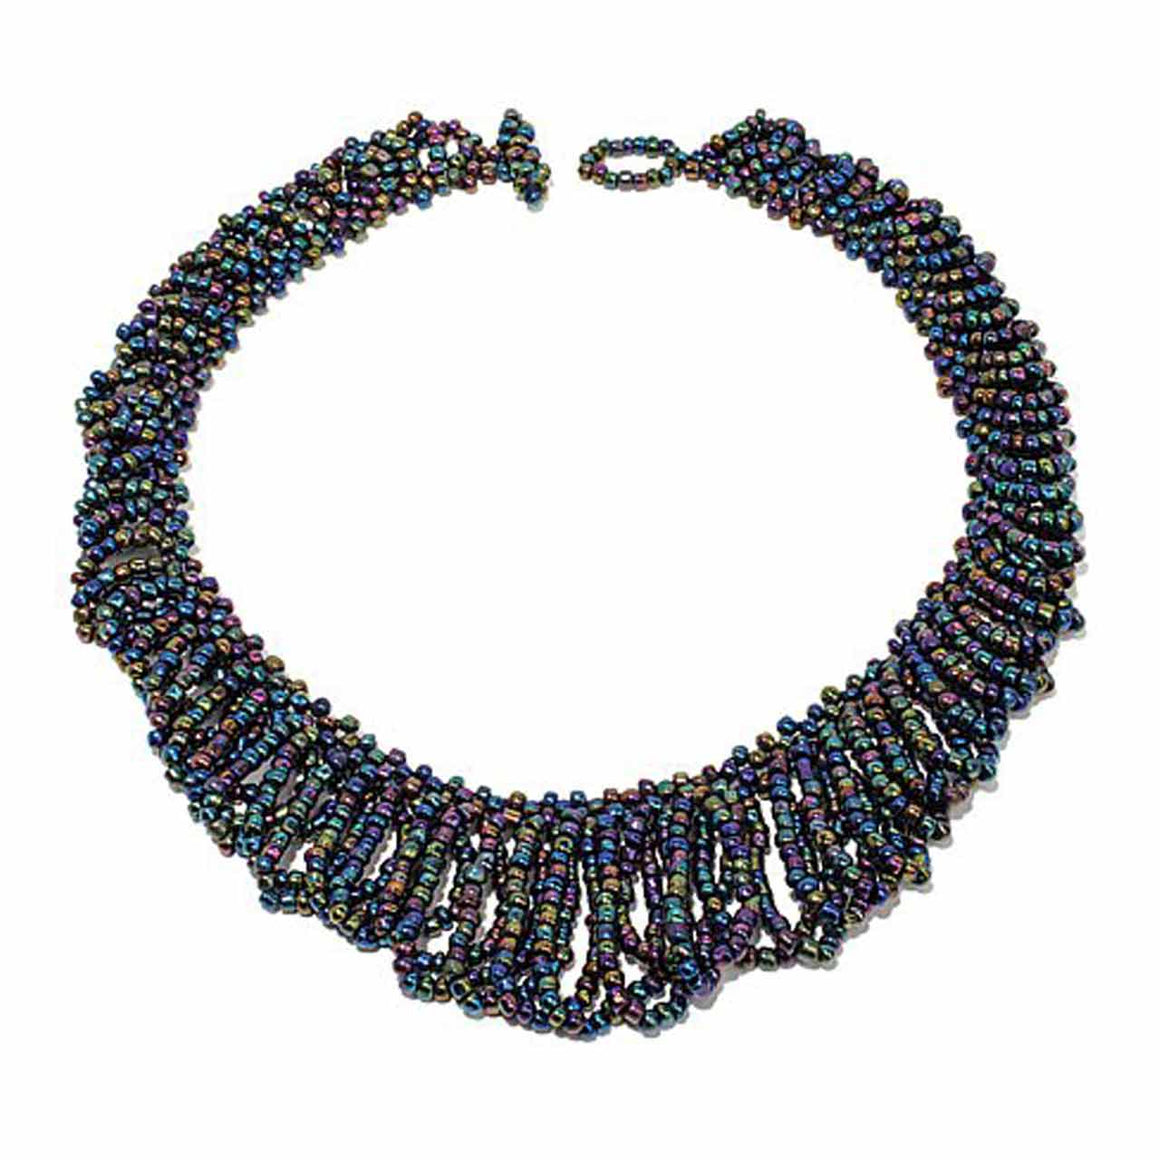 Peacock Tone Glass Bead Necklace